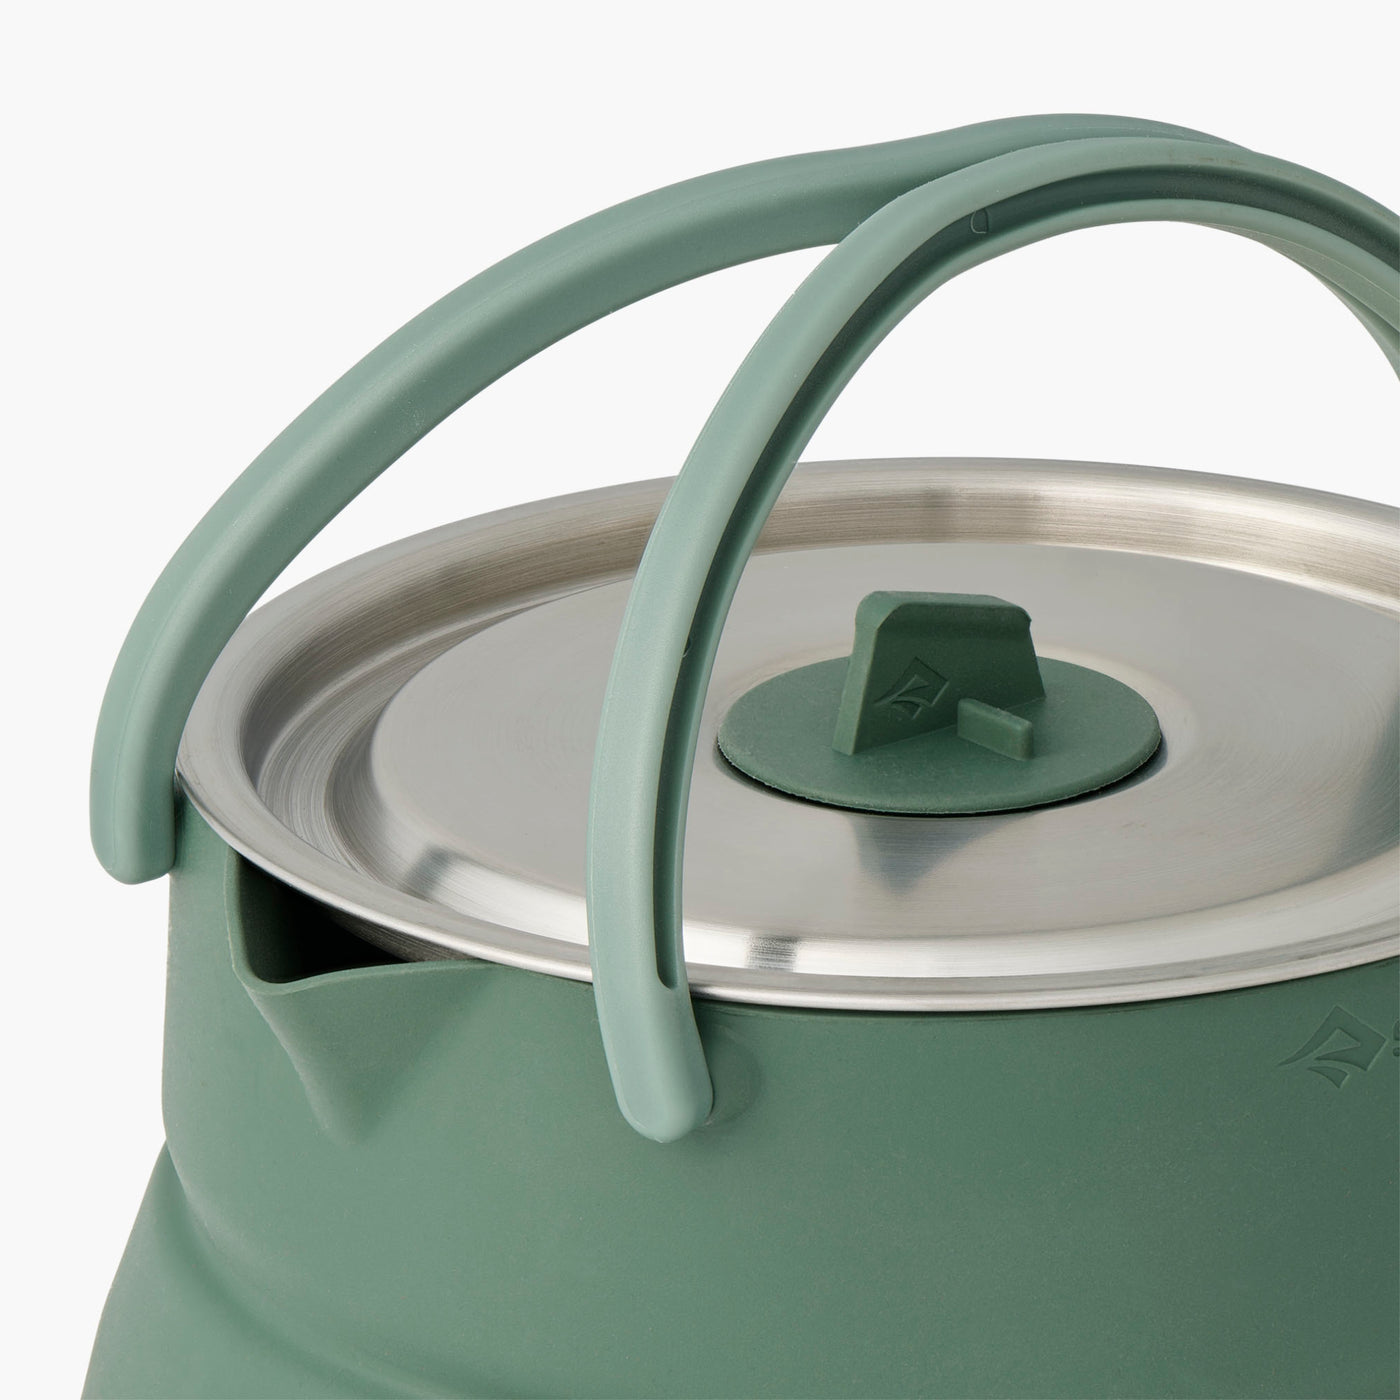 Detour Stainless Steel Collapsible Kettle - 1.6L